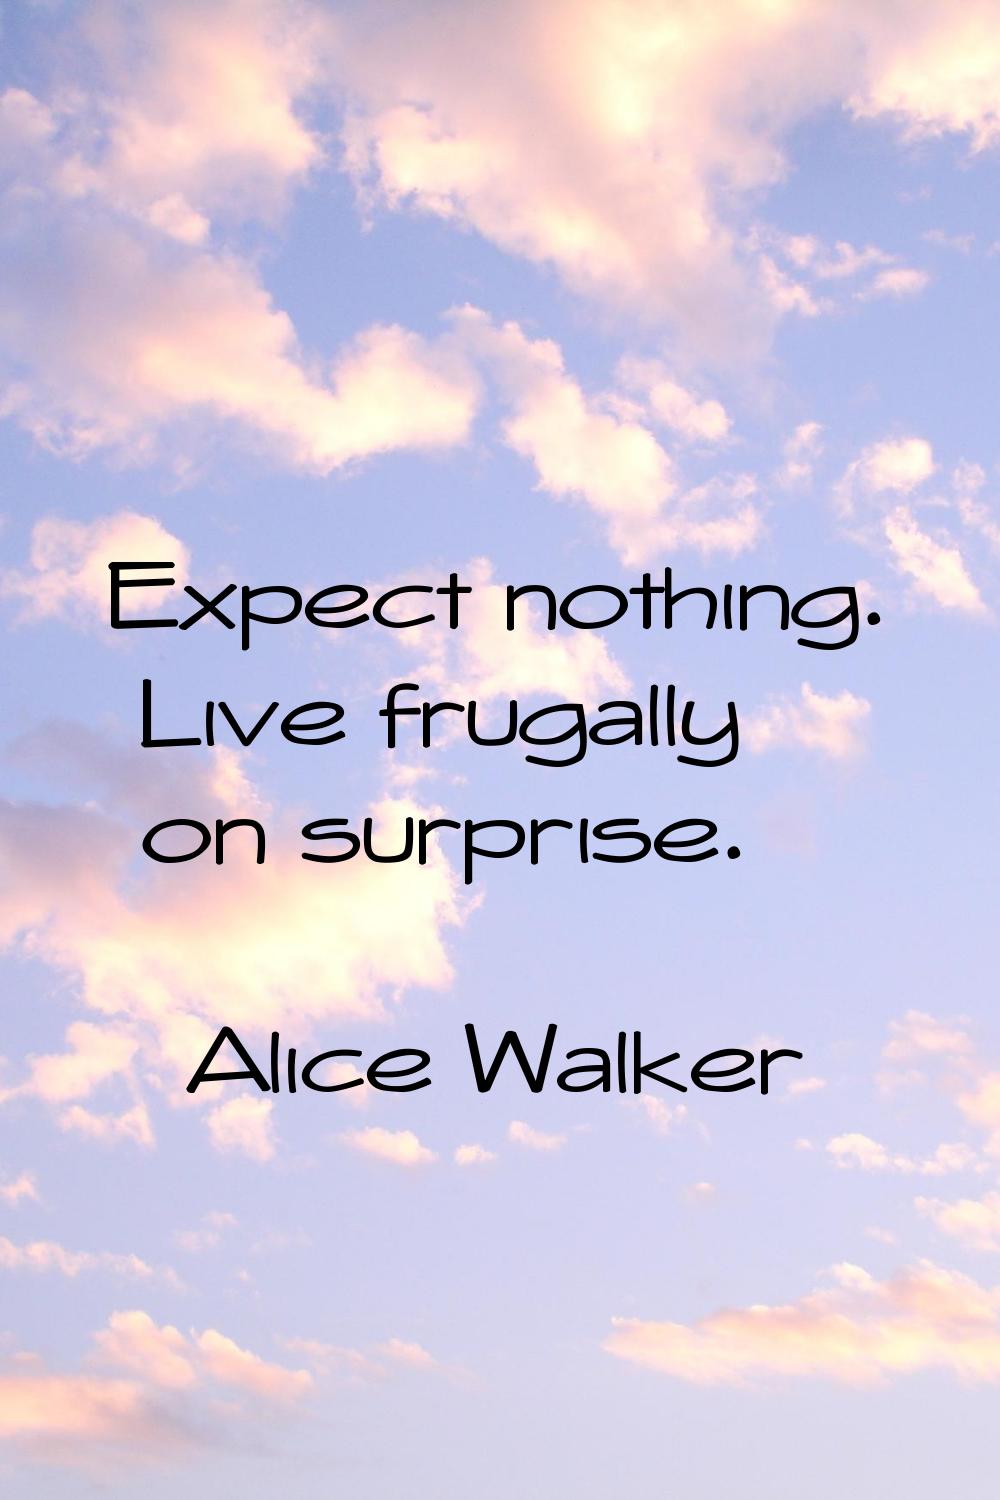 Expect nothing. Live frugally on surprise.